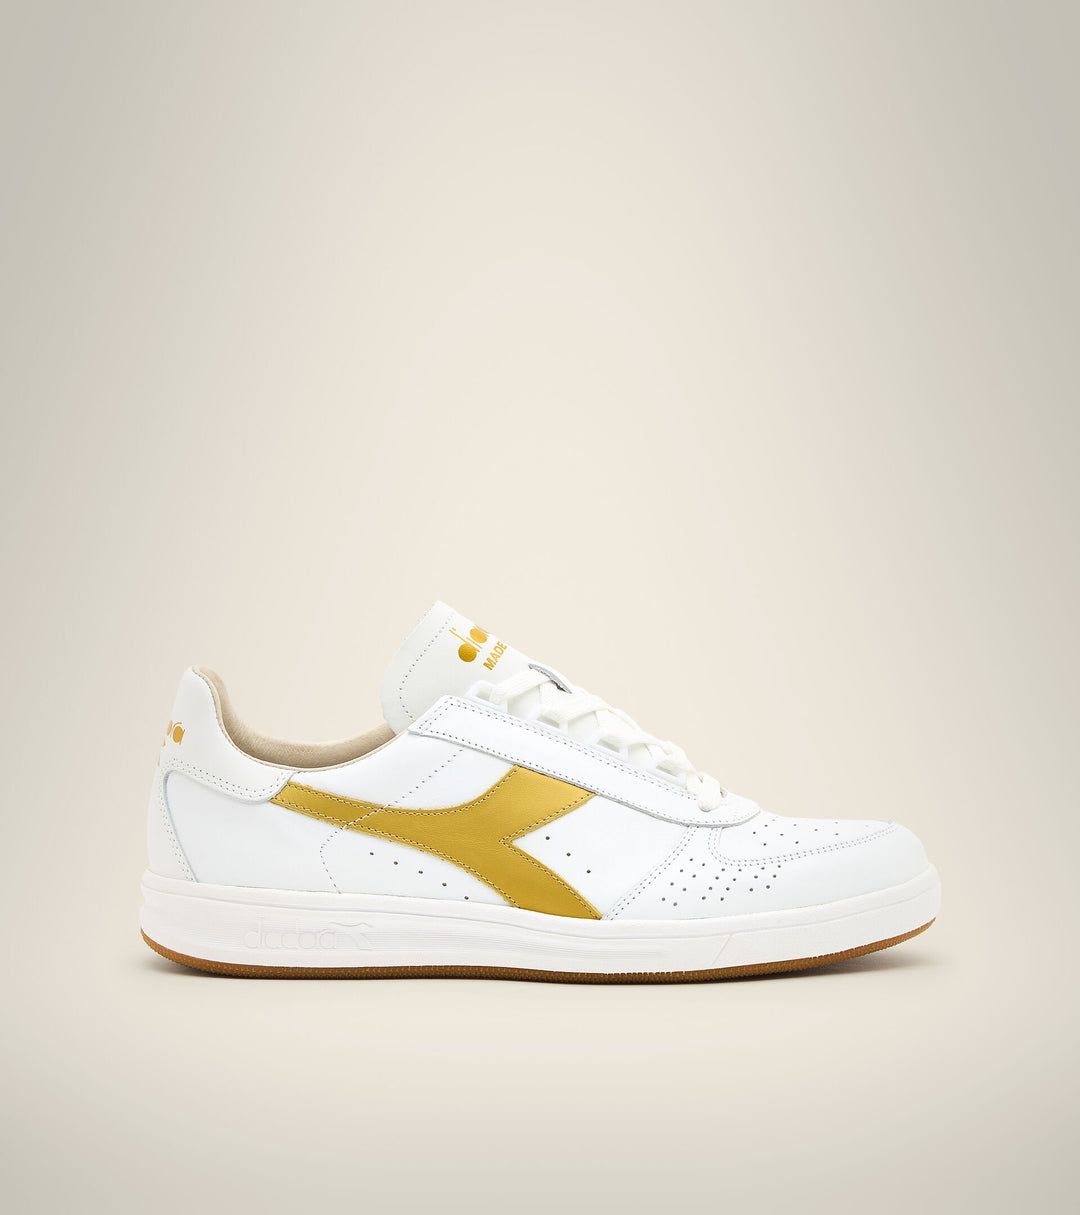 side view of white and gold B. elite h italia sport diadora shoe made in italy